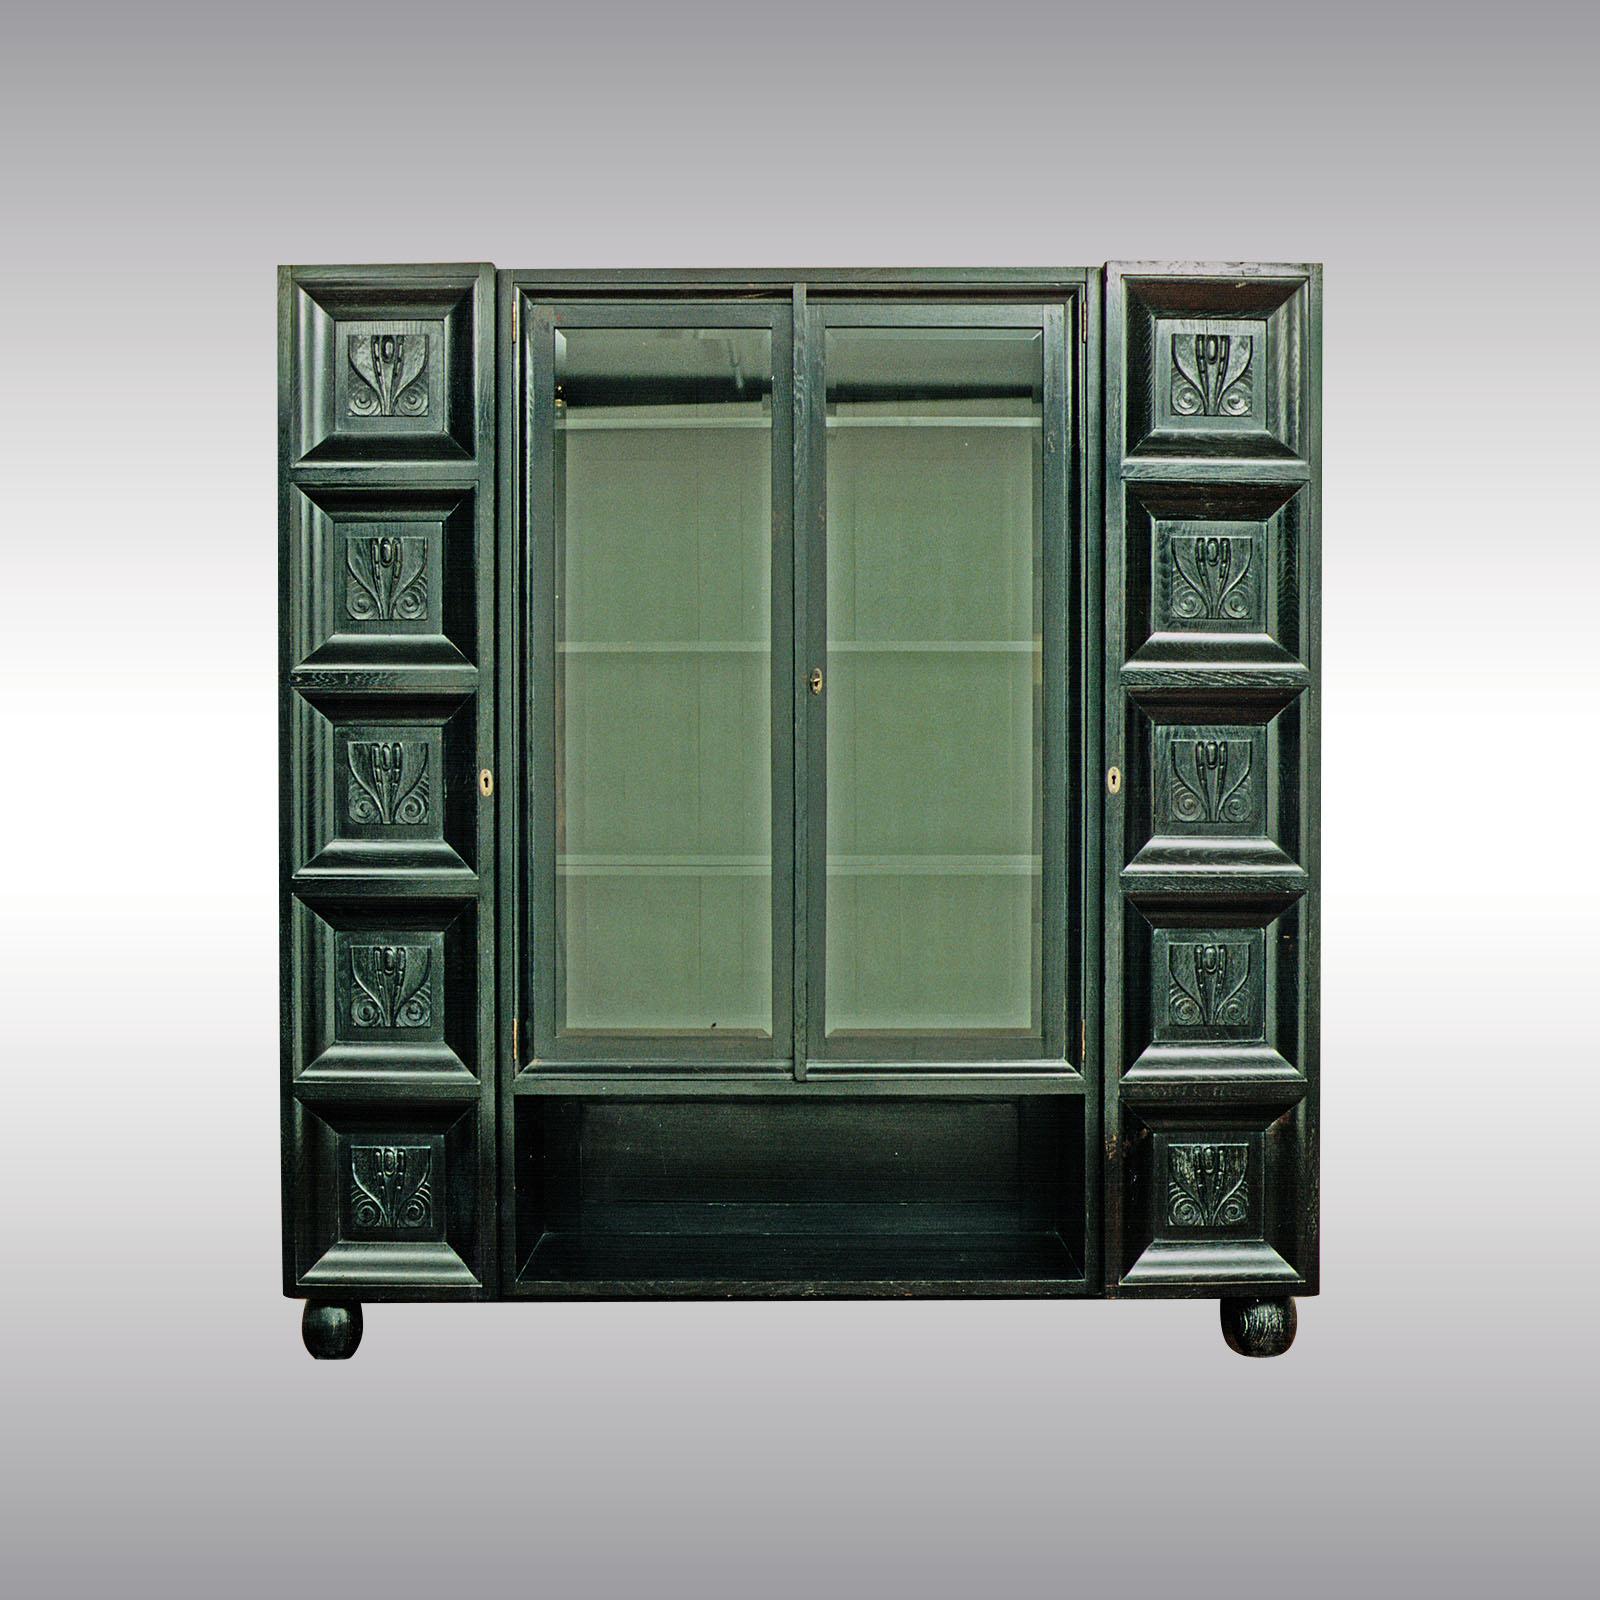 Very rare cabinet from the short period when the Wiener Werkstätte has had its own cabinet makers workshop in the Neustiftgasse in Vienna. Attributed to Koloman Moser or Emanuel Margold. Punched locks and original key! Literature: Sotheby's Fine